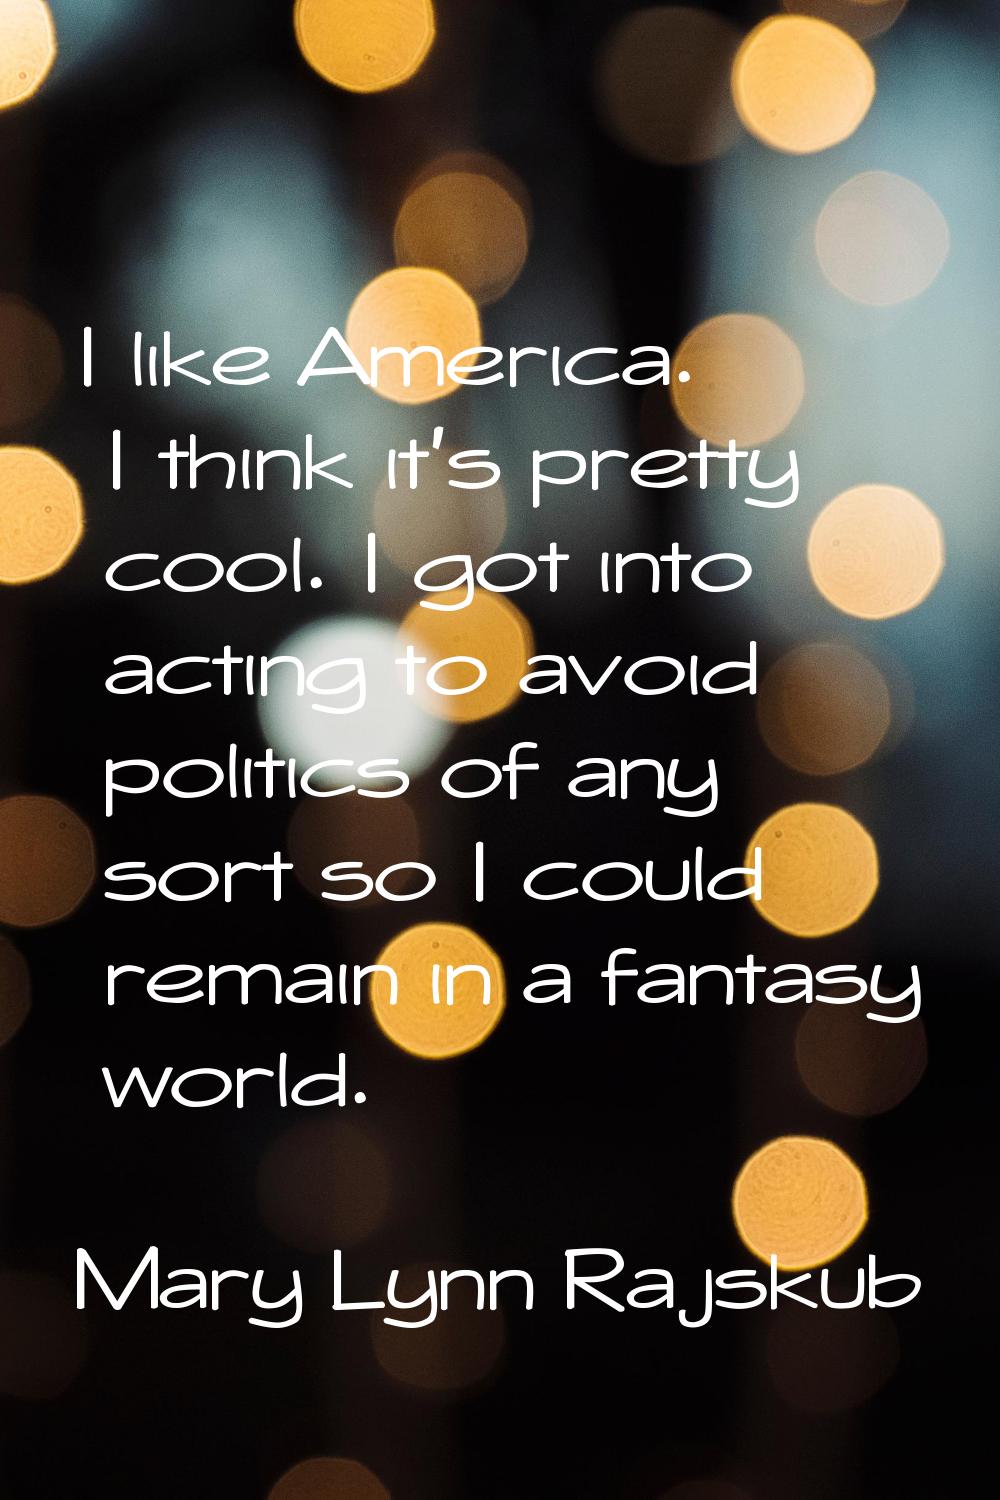 I like America. I think it's pretty cool. I got into acting to avoid politics of any sort so I coul